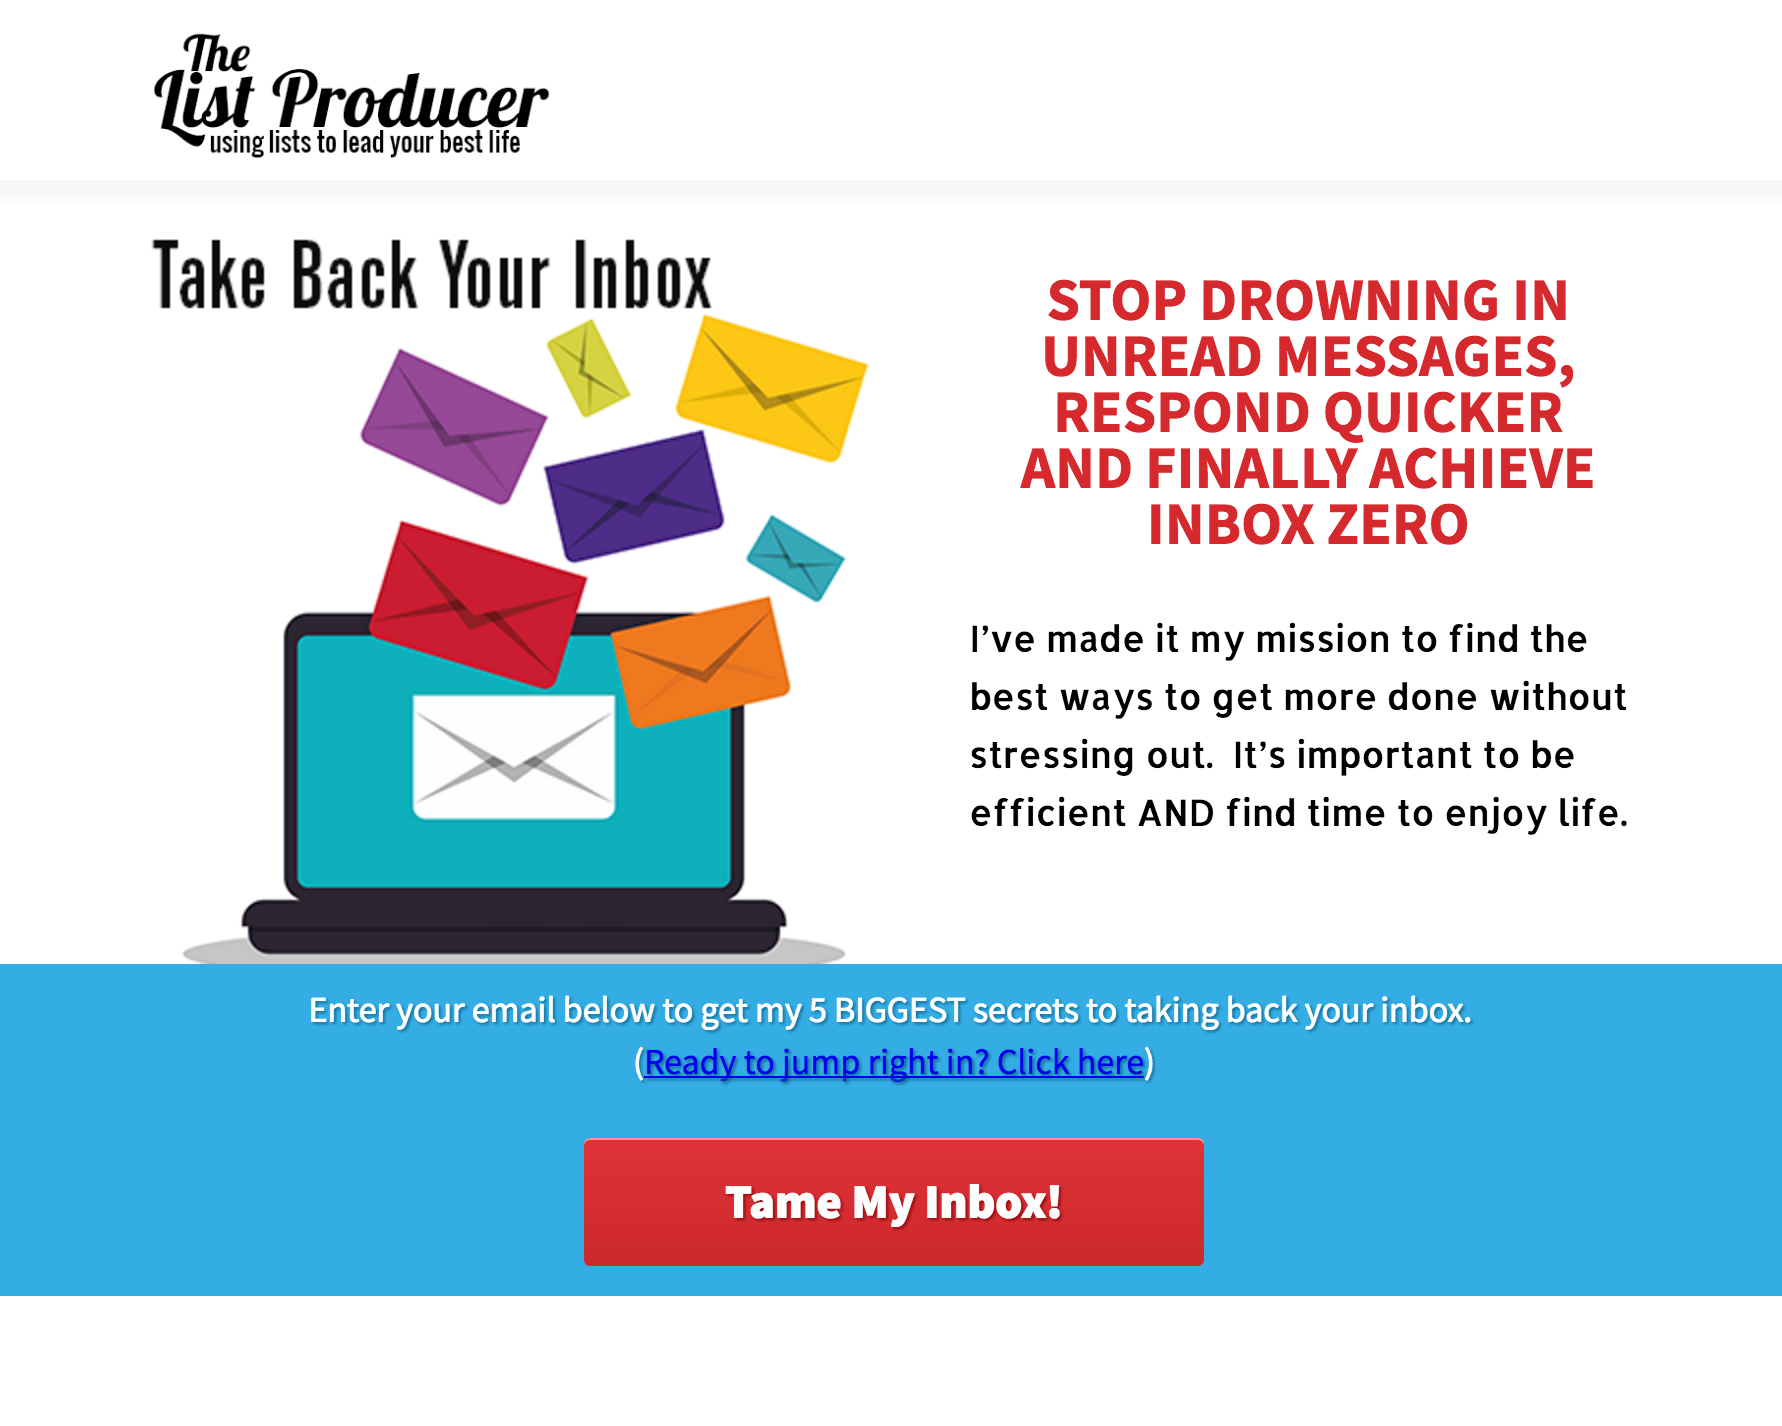 Take Back Your Inbox